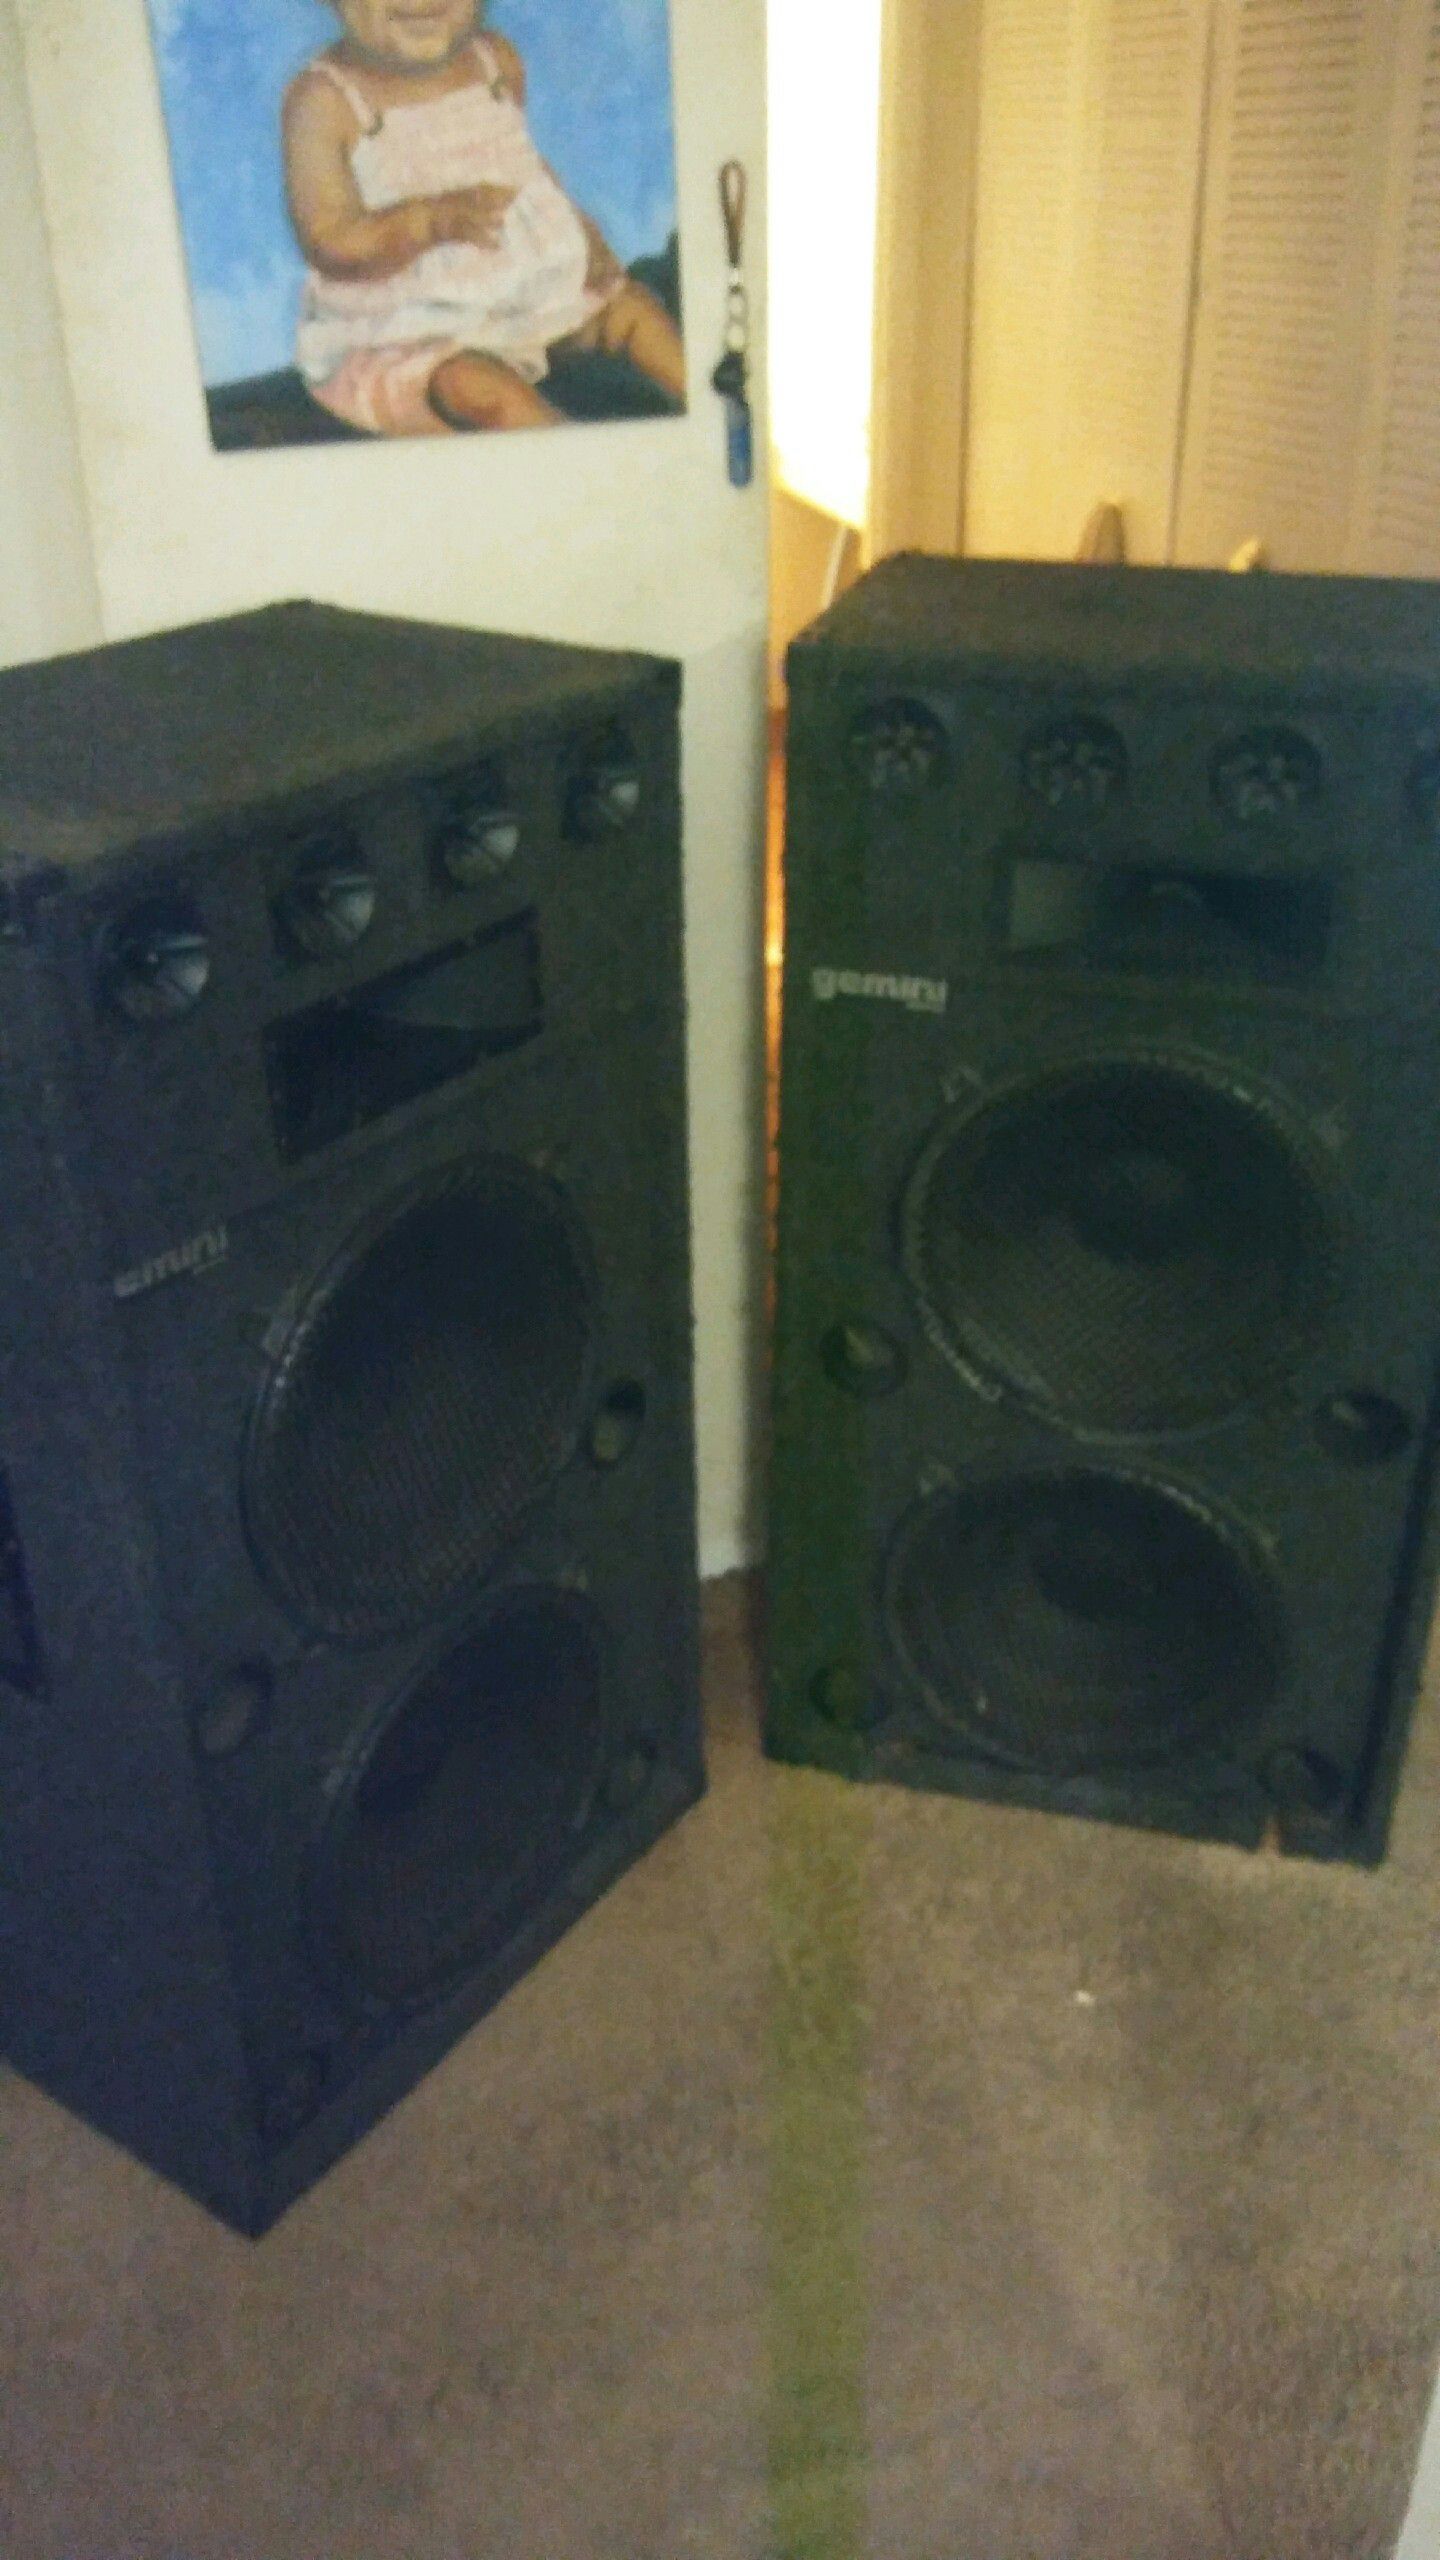 Gemini Concert Speakers Works Awesomely